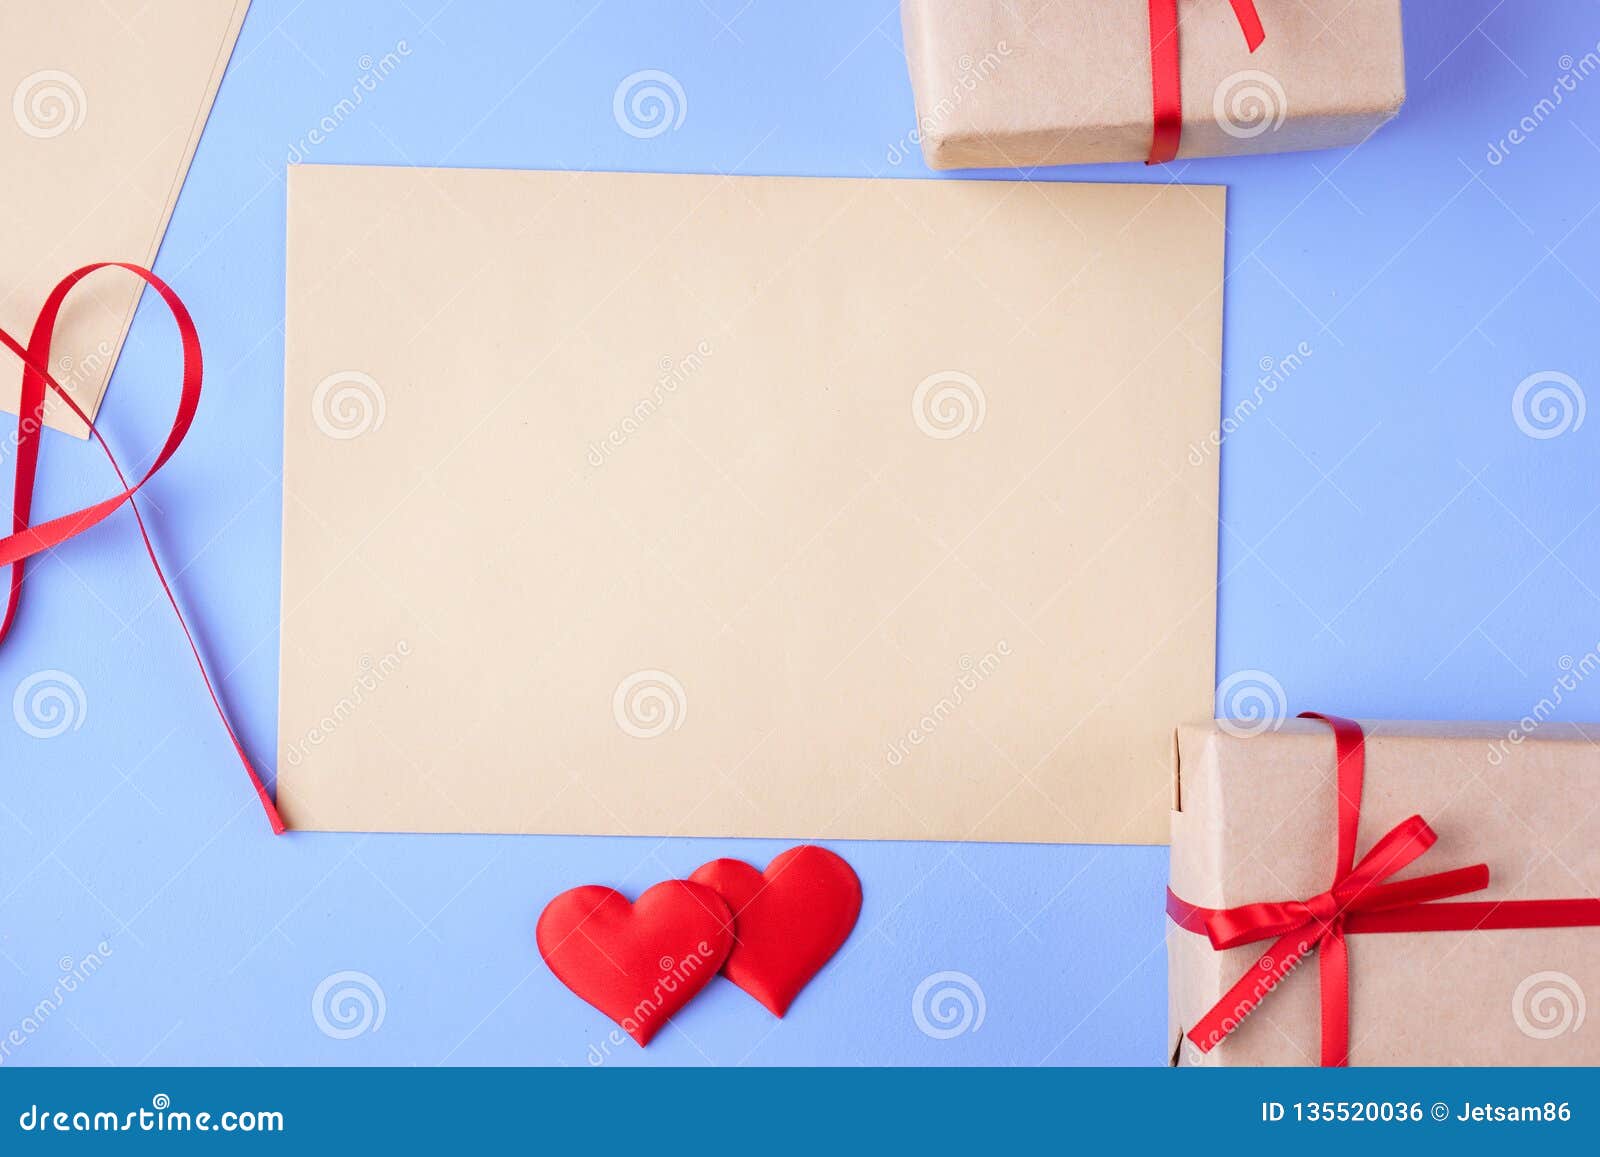 Holiday Background, Love Letter, Wish List Stock Photo - Image of heart ...